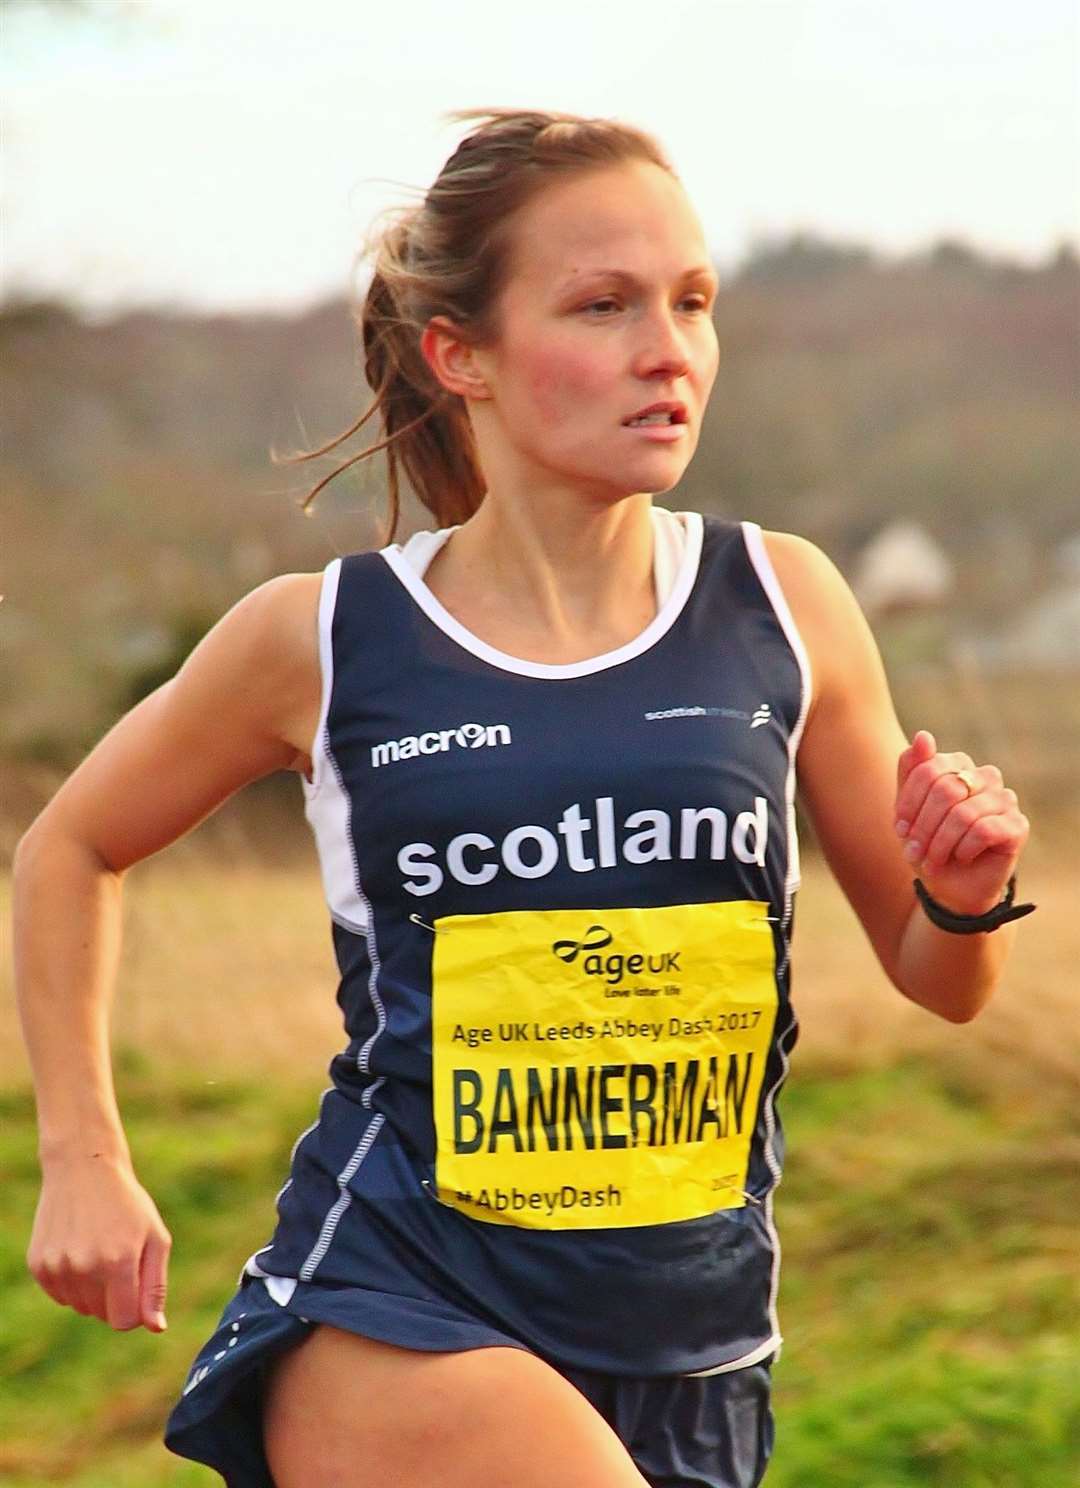 Jenny Bannerman will compete at the Castle of Mey 10k.